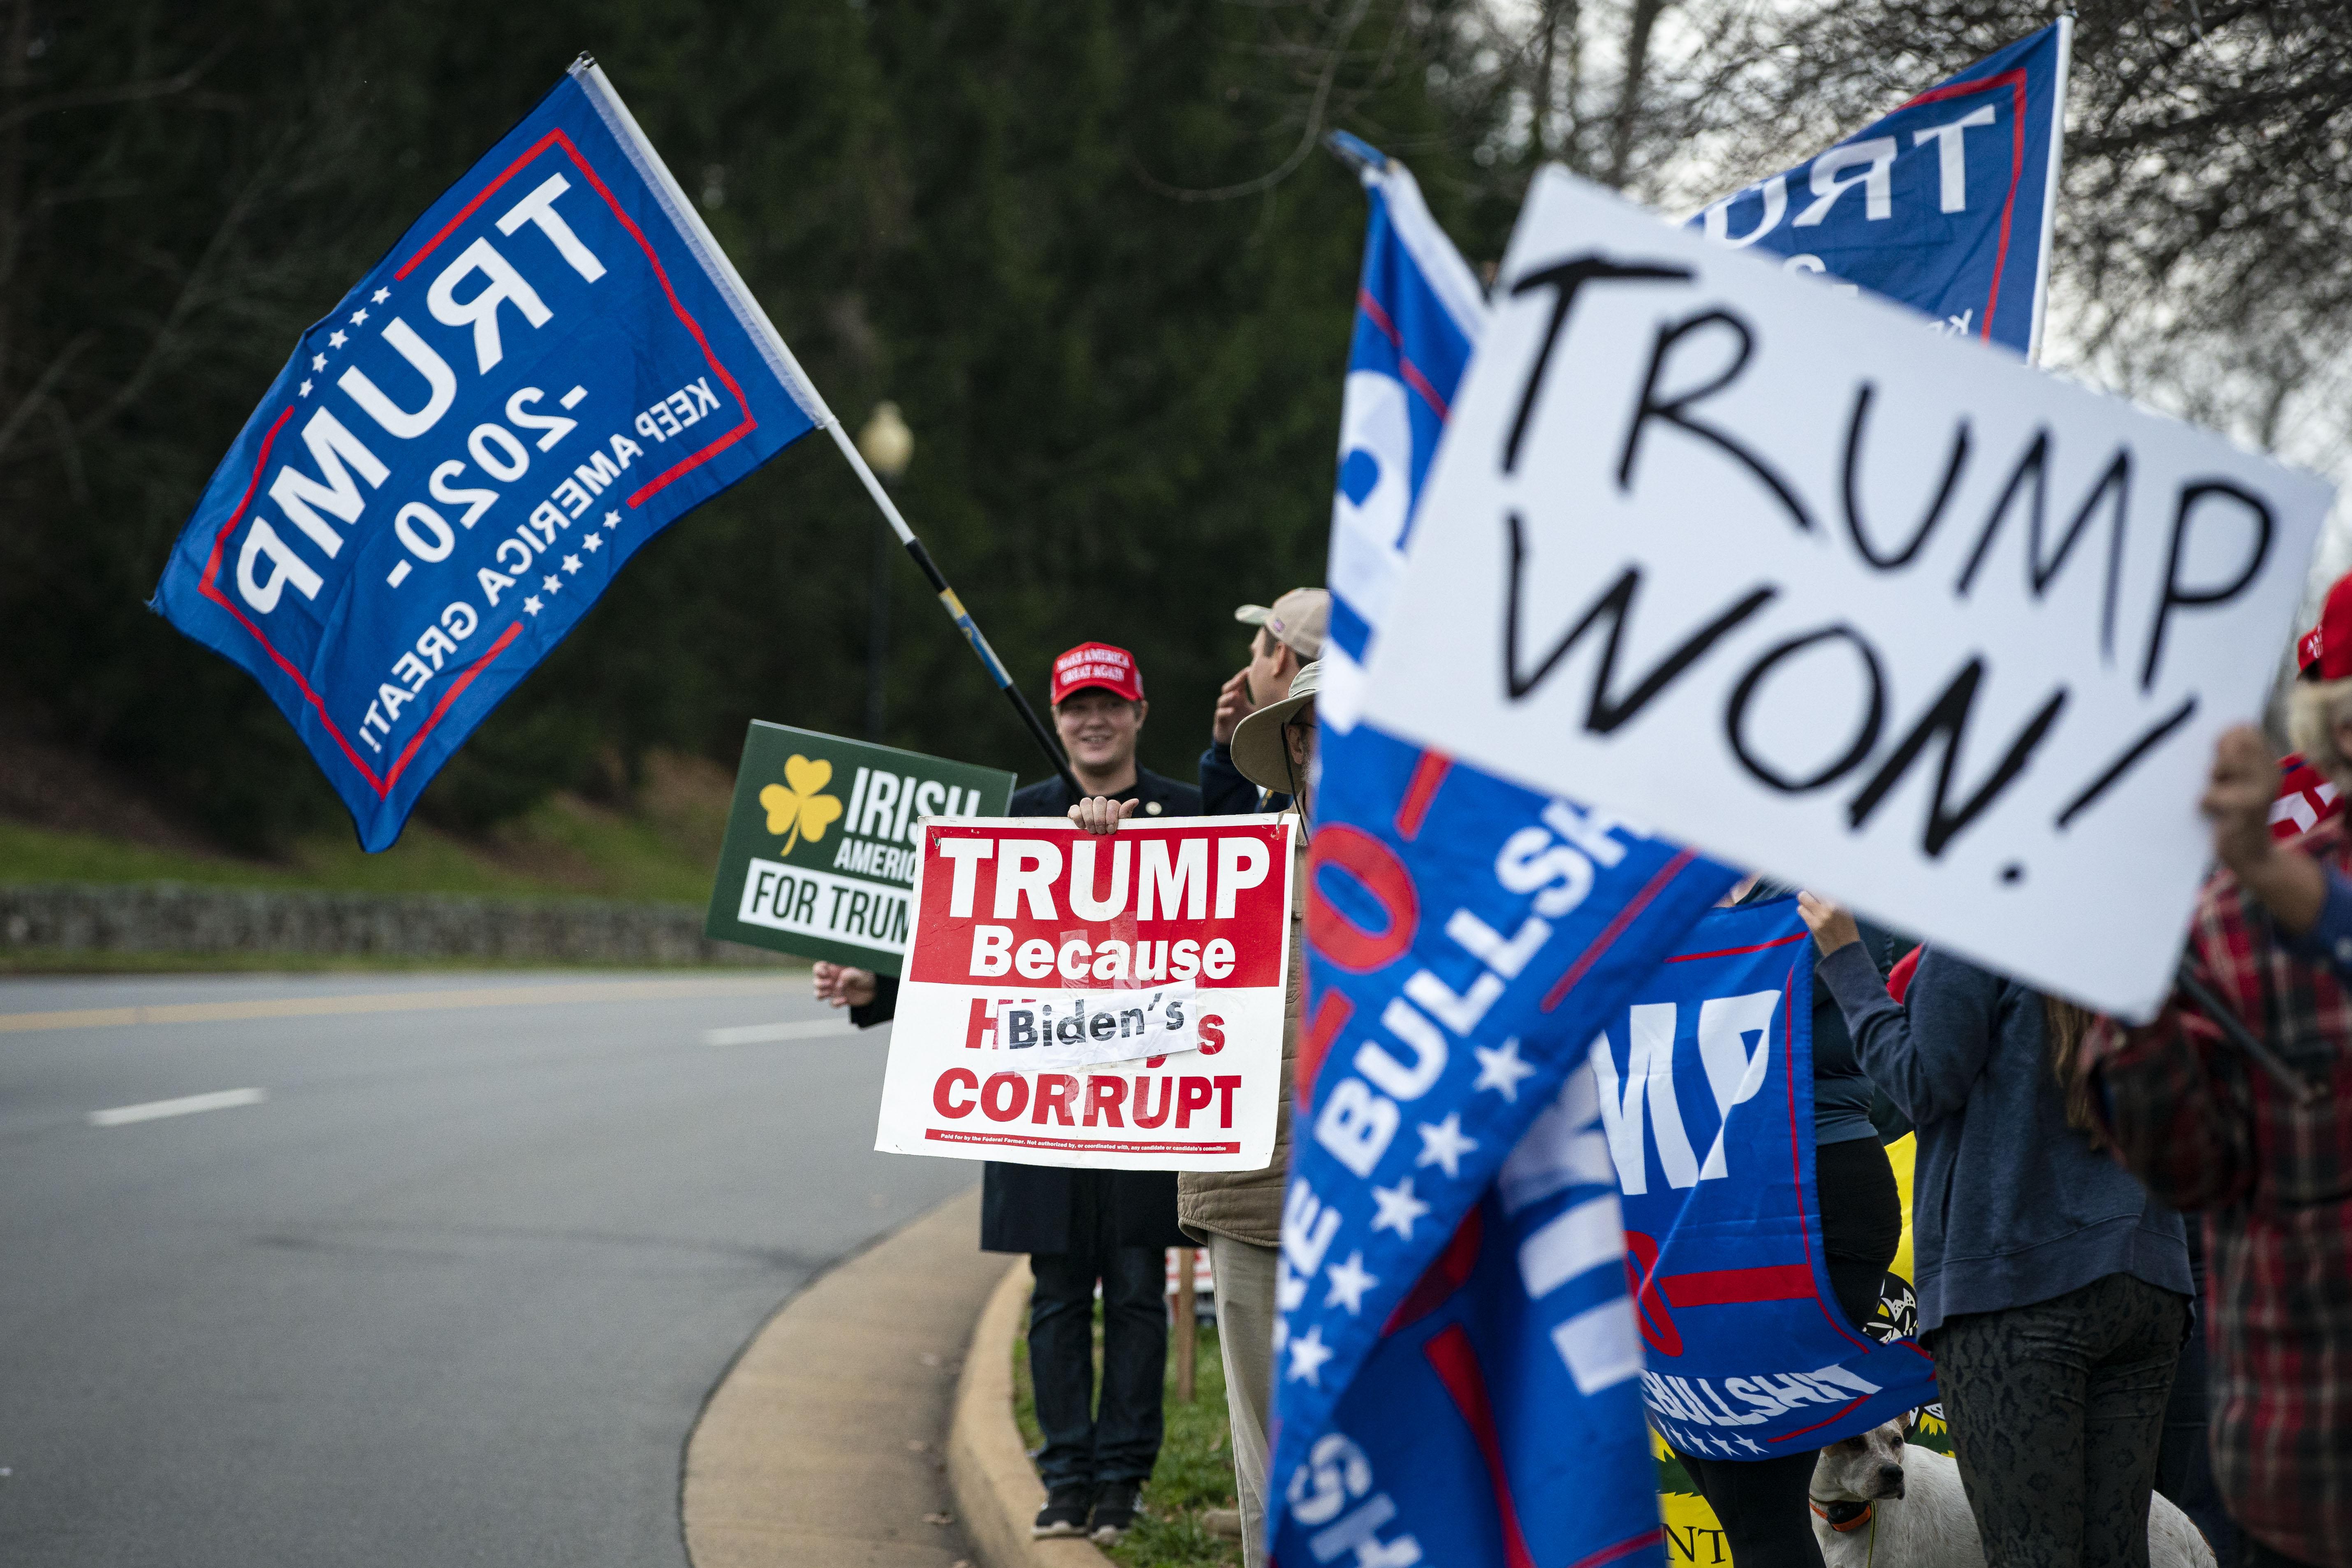 A crowd on the side of the road holding up signs that say "Trump 2020" and "Trump Won"